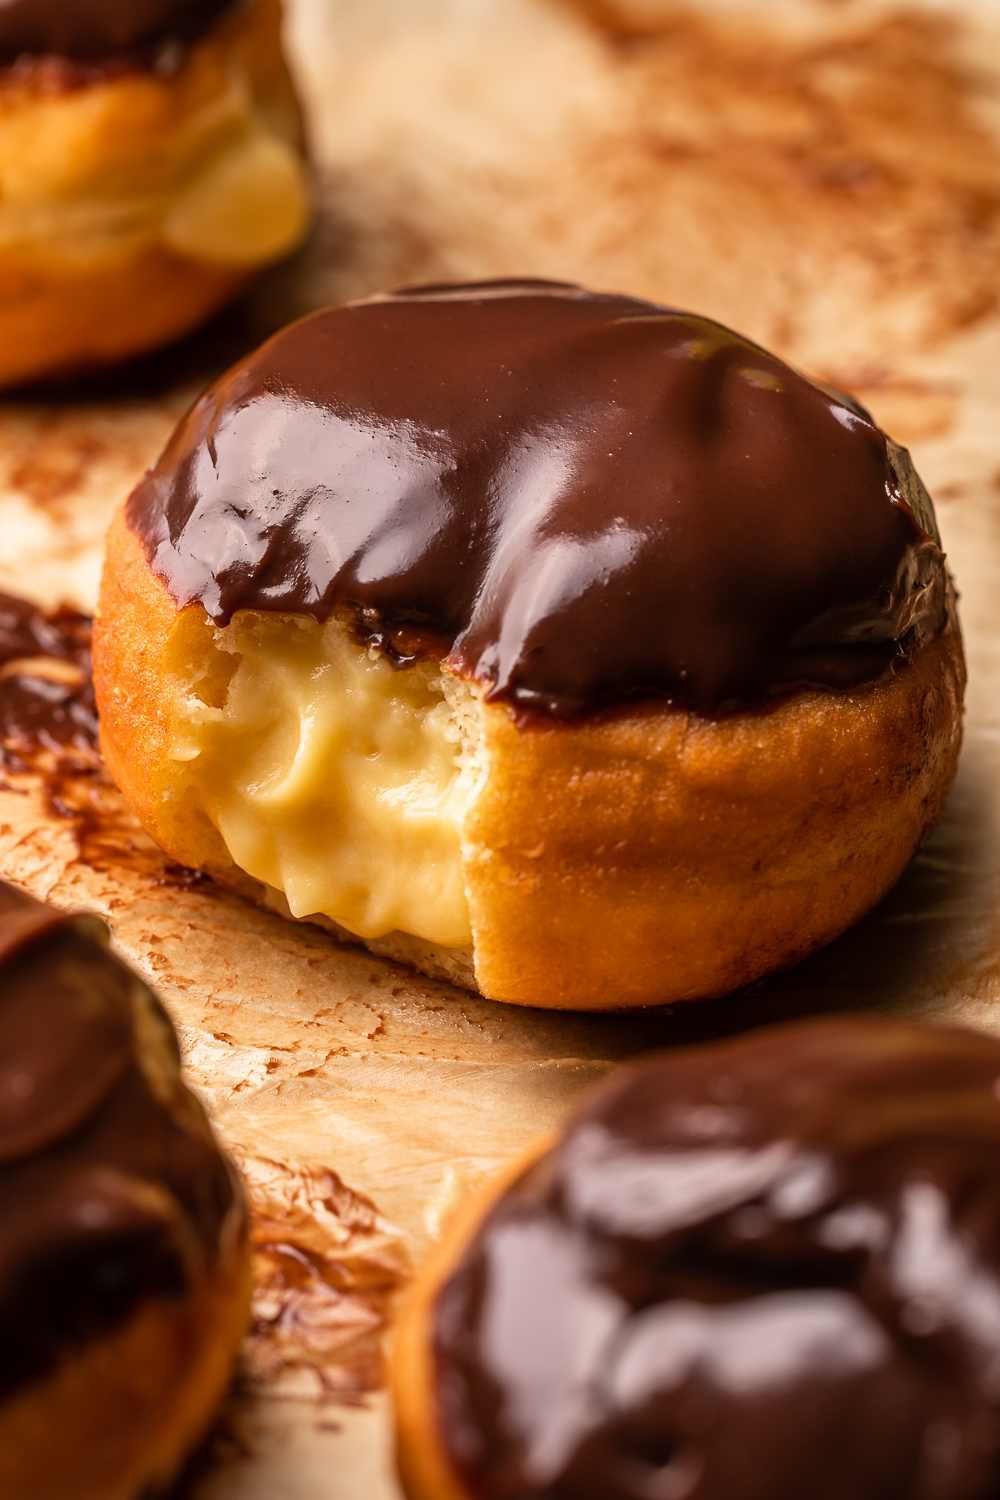 Fluffy Boston Cream Donuts are stuffed with pastry cream filling and dipped in a rich chocolate glaze! Don't let the deep frying scare you off, because this recipe is worth every step. And so much better than anything you'll get from the donut shop.